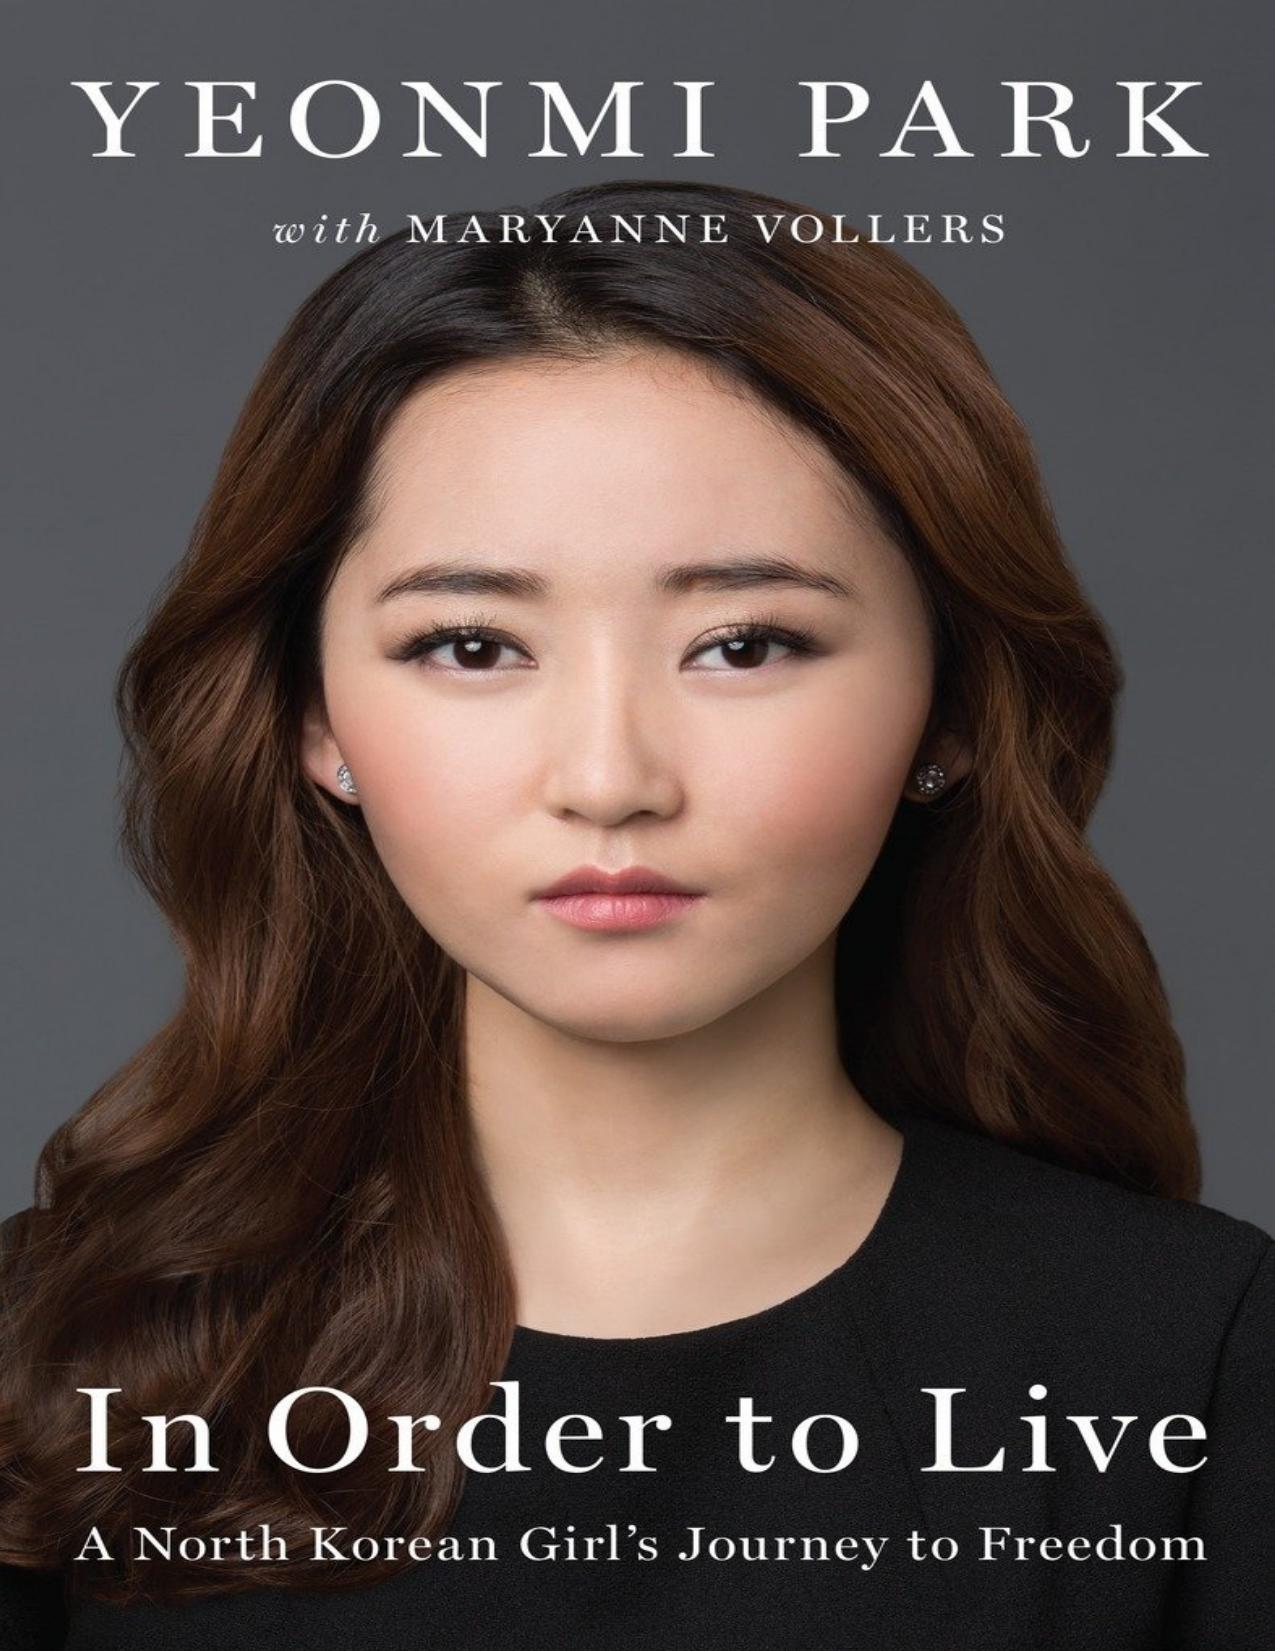 In Order to Live. A North Korean Girl's Journey to Freedom - PDFDrive.com by Yeonmi Park